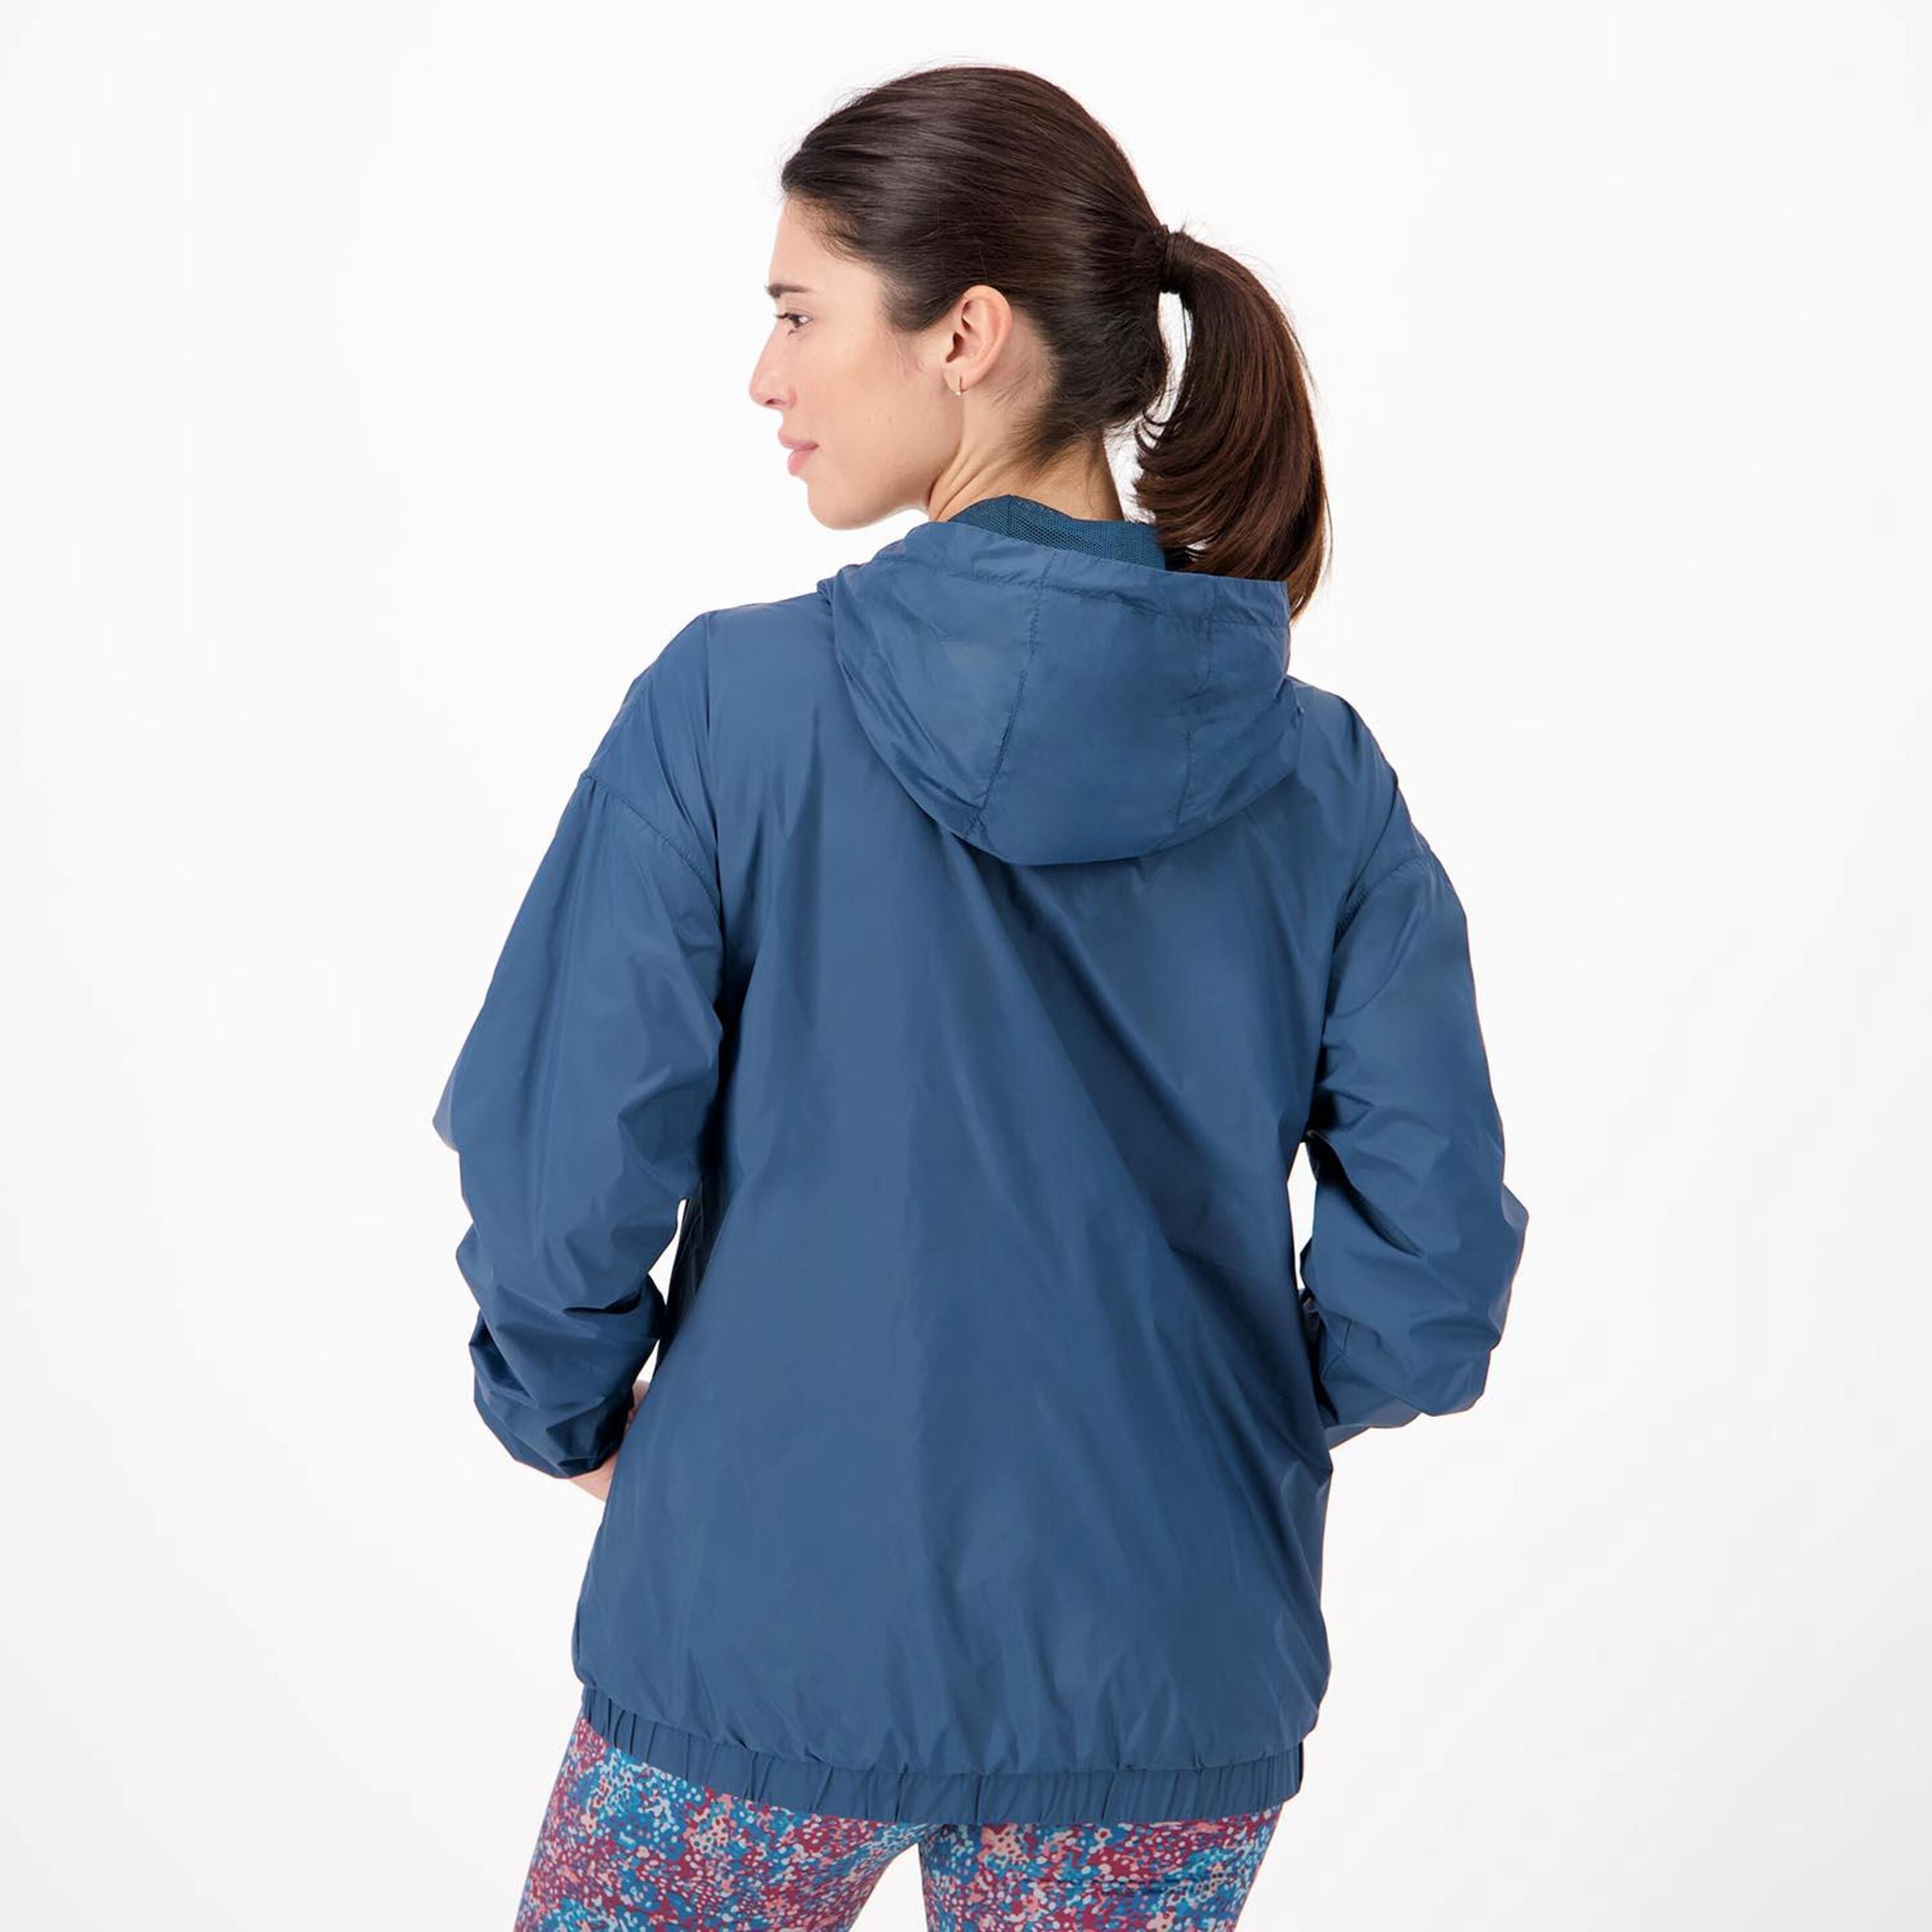 Doone Supportive - Verde - Sudadera Fitness Mujer